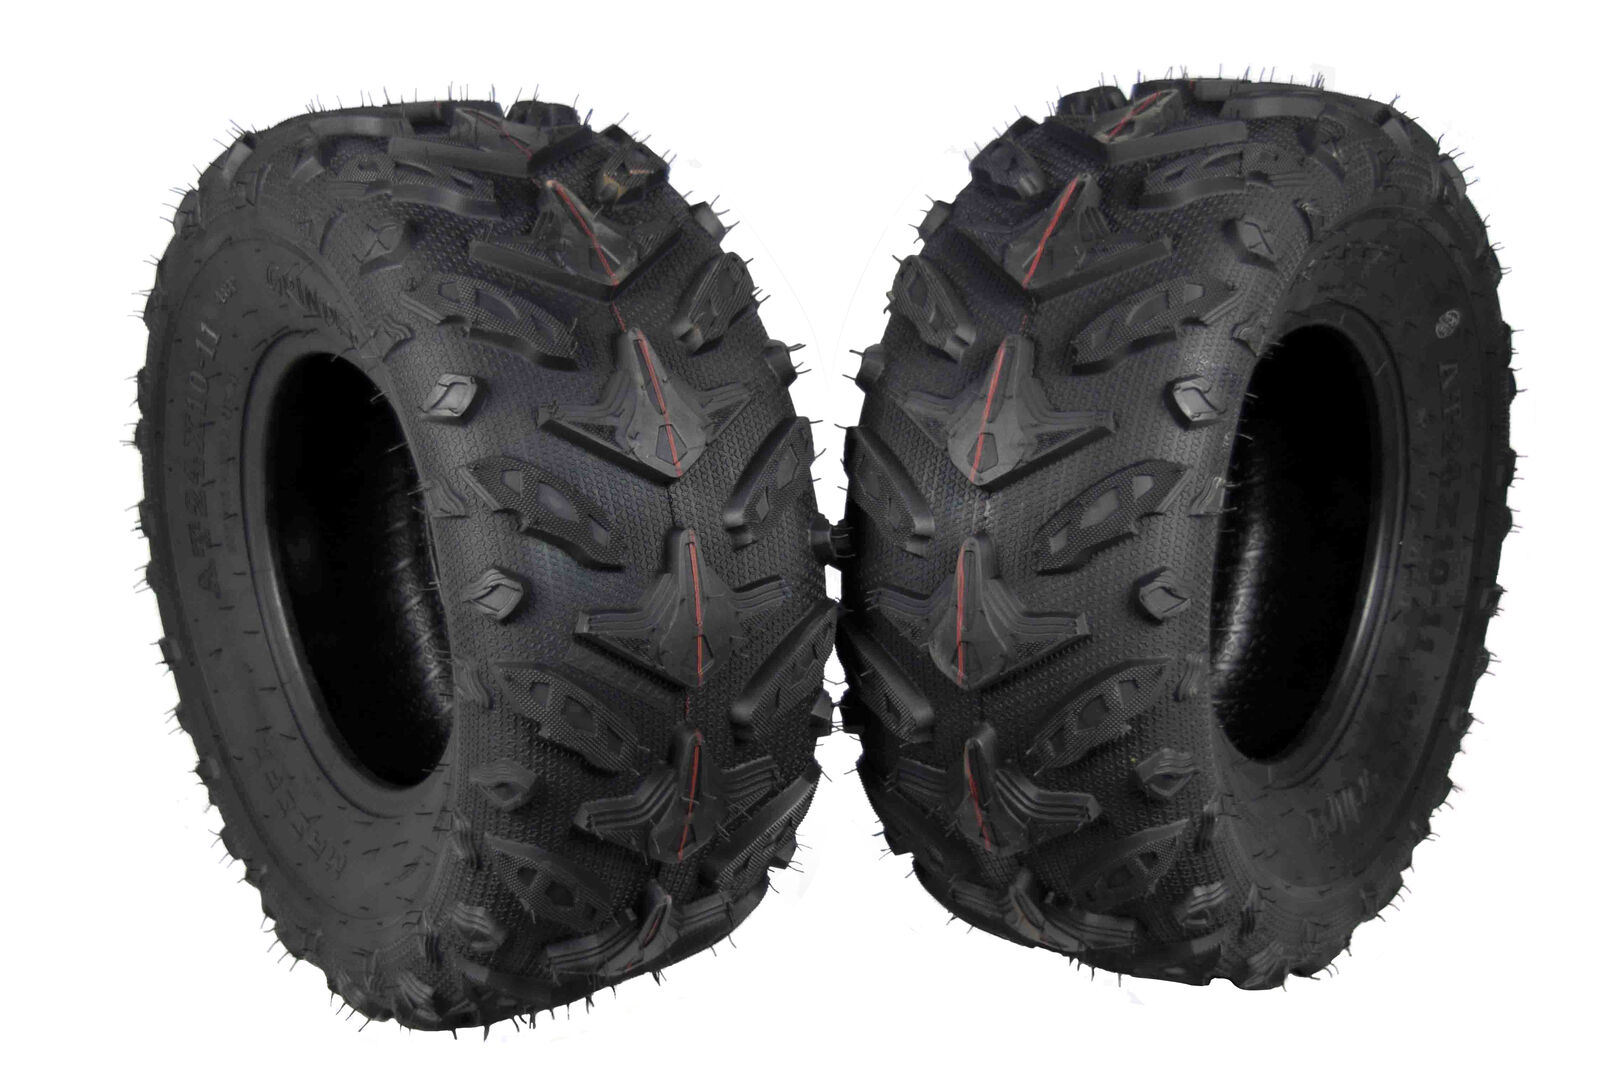 MASSFX Grinder 24x10-11 Rear Tire 6 Ply Soft/Hard Pack Ground for ATV (2 Pack)